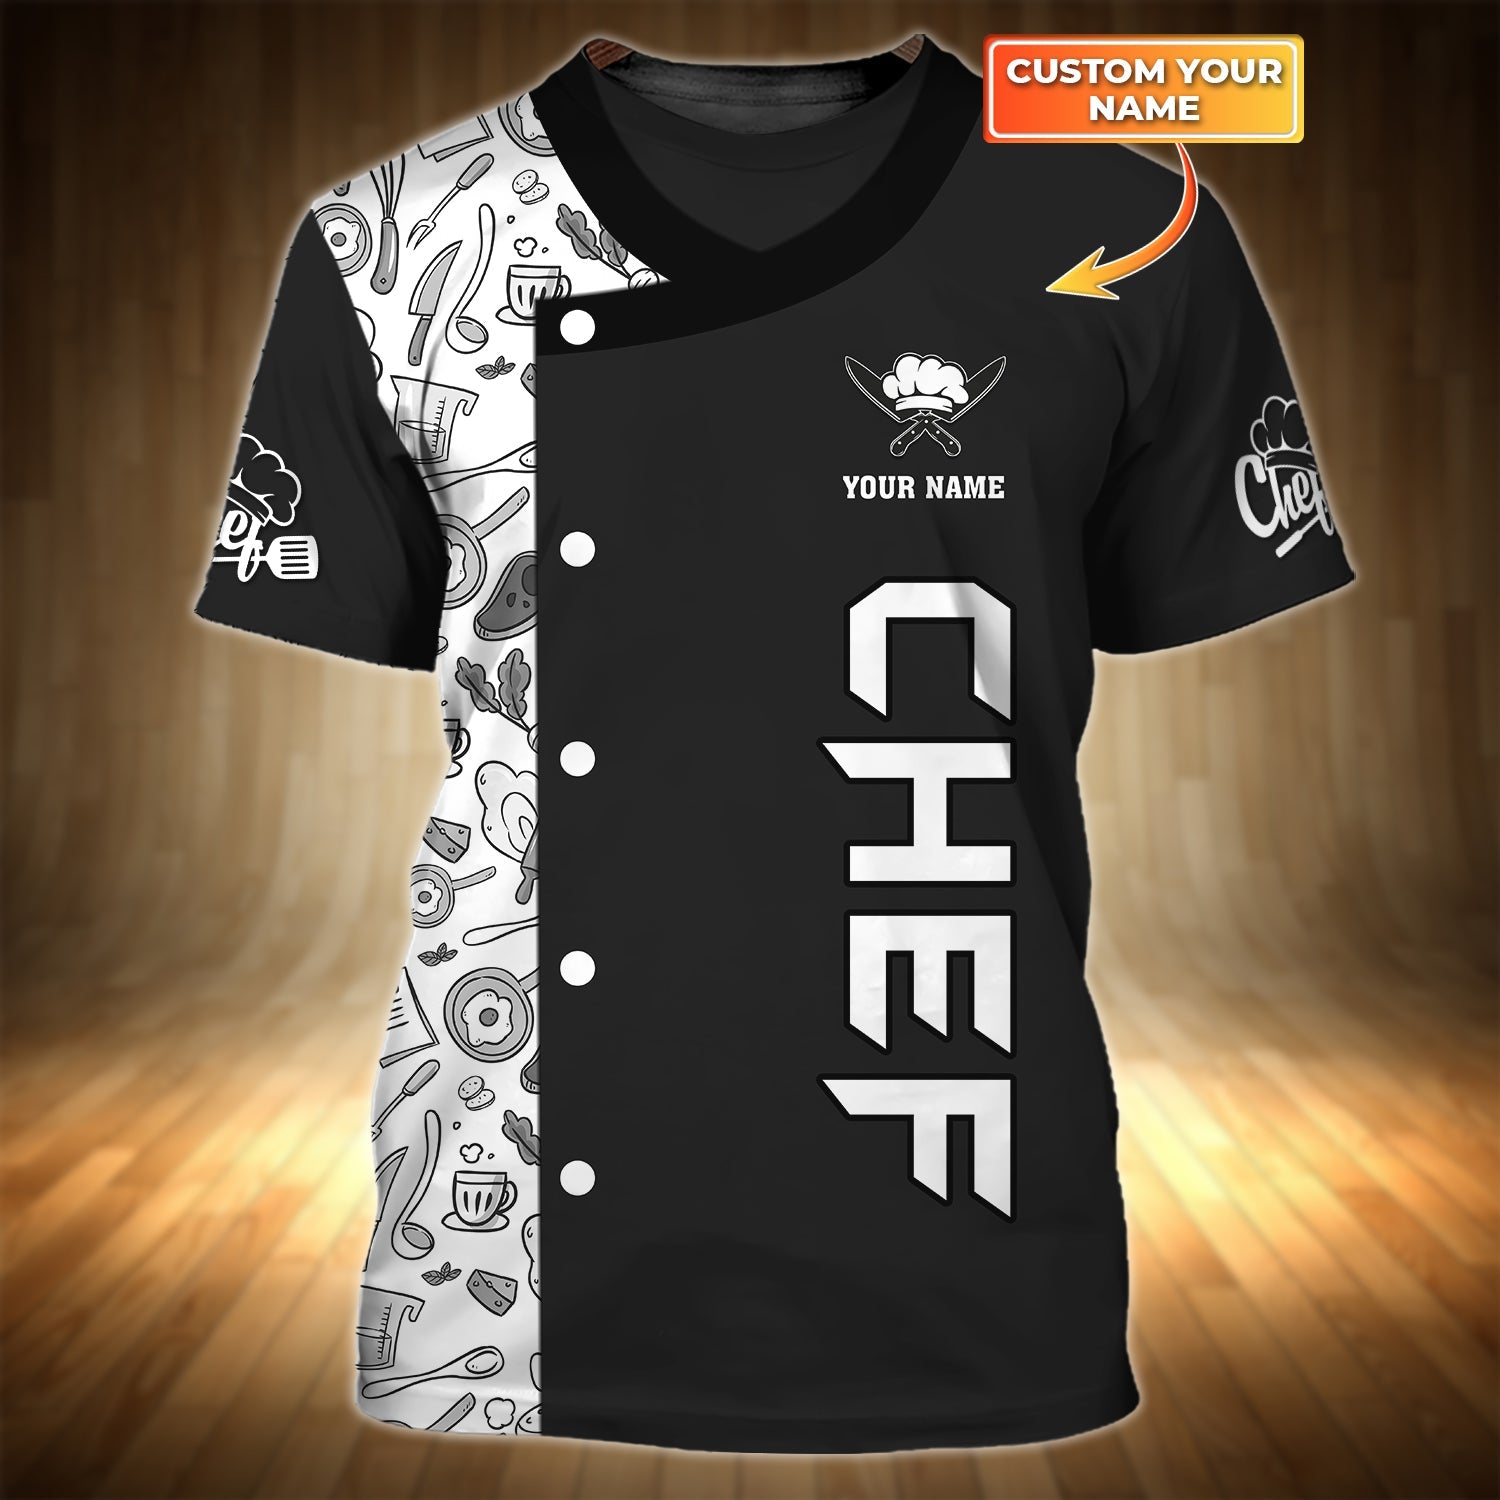 Chef Pattern Shirt Chef Personalized Name 3D Tshirt Gift For Cooks Chef Uniform/ Master Chef Shirt